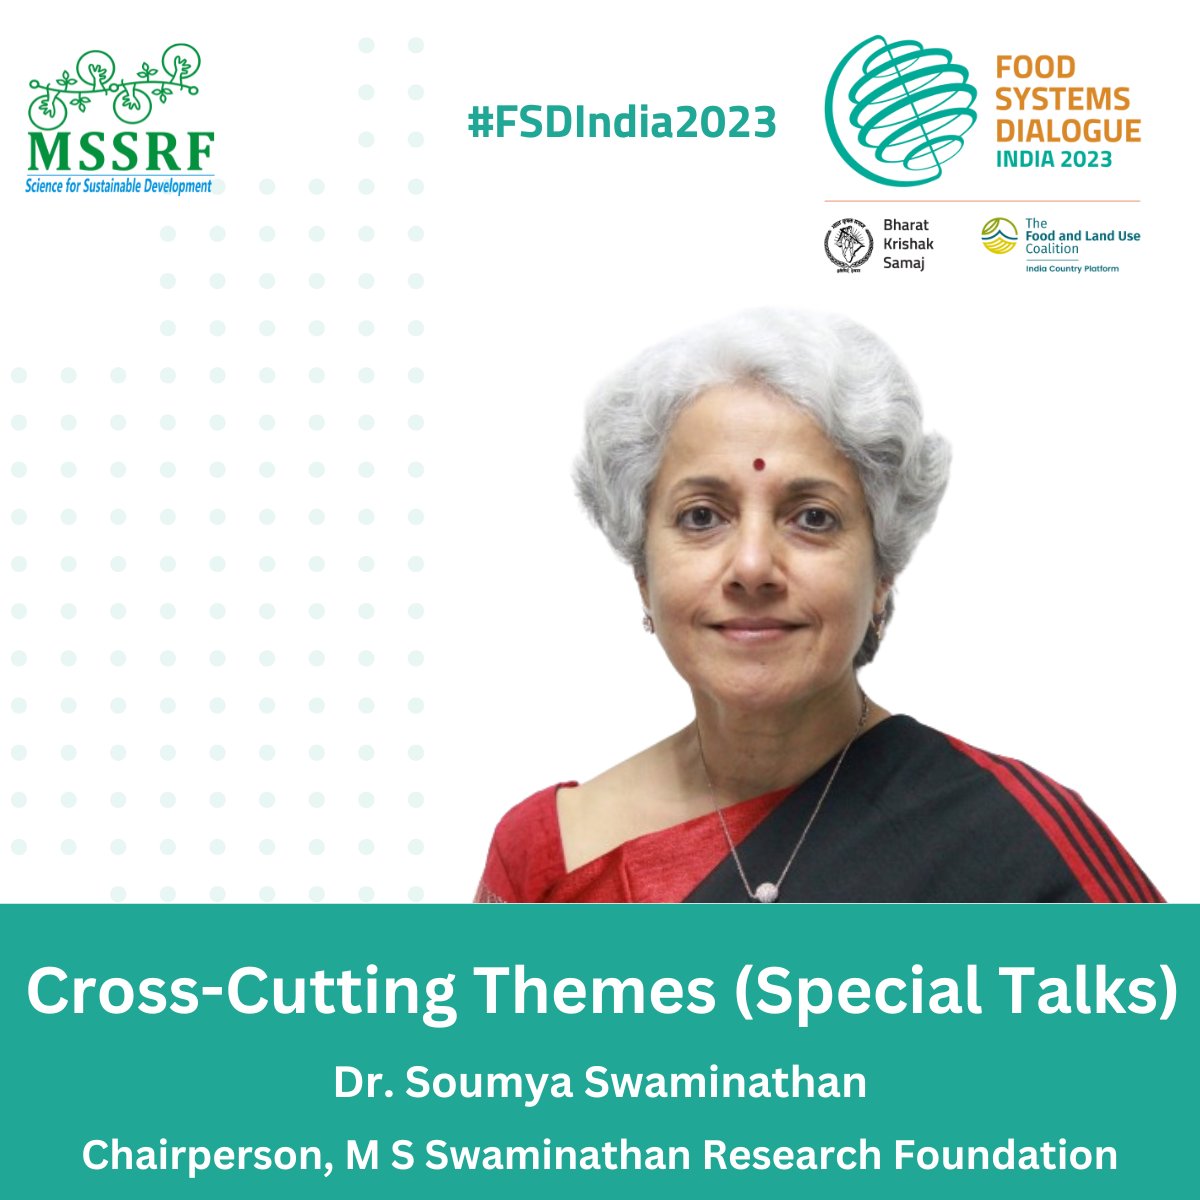 .@doctorsoumya speaks at #FSDIndia2023 @FOLUIndia conference 

#foodsystems #foodsecurity #nutritionsecurity #SDG12 #climatechange